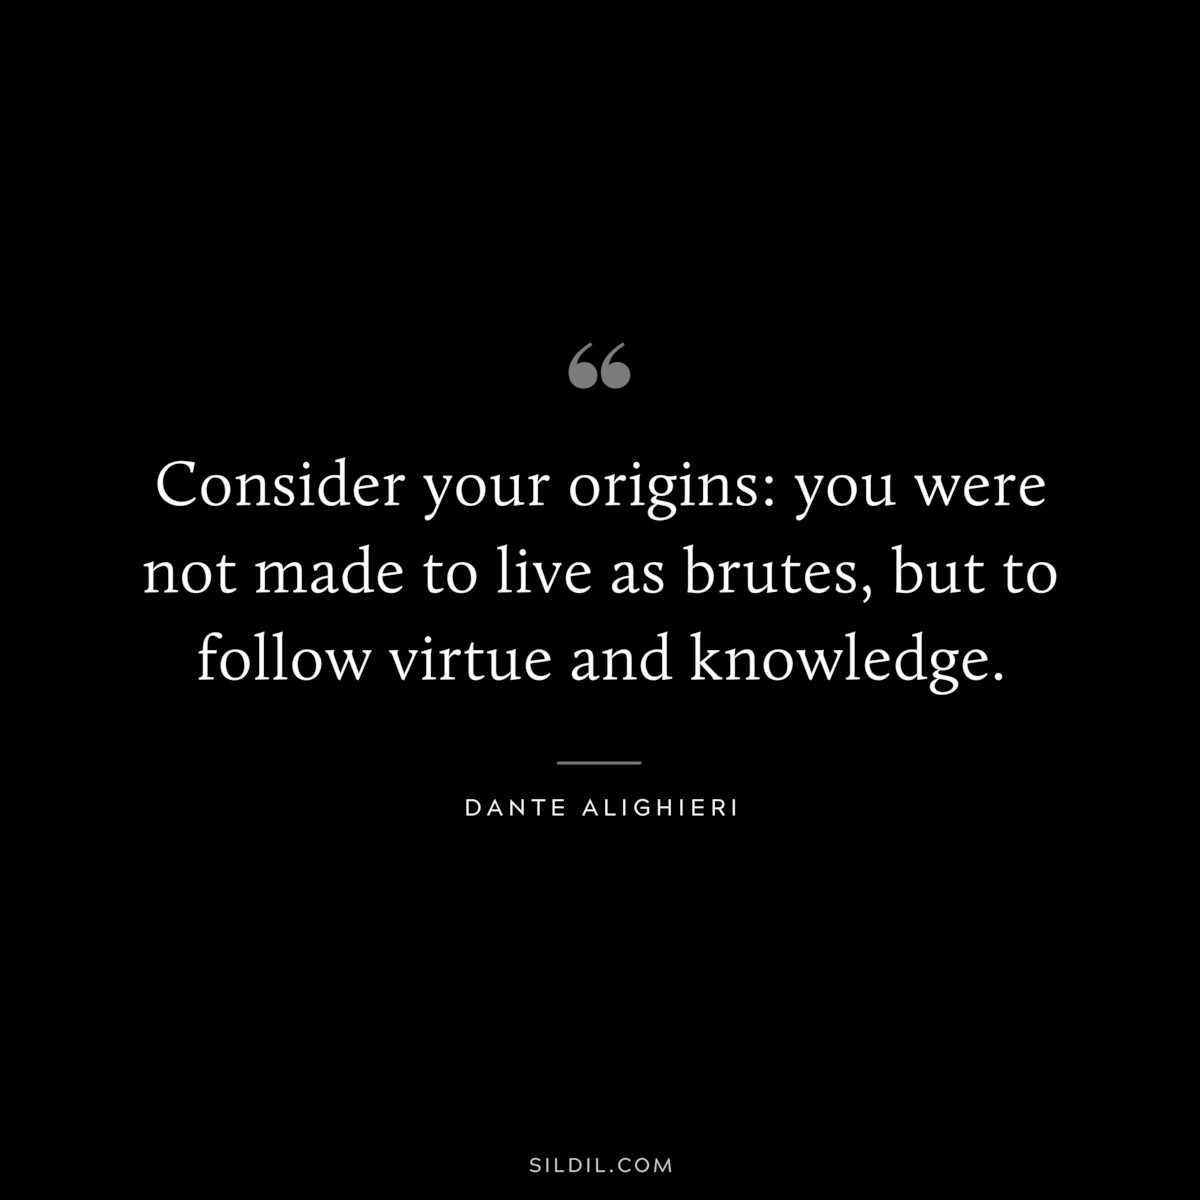 Consider your origins: you were not made to live as brutes, but to follow virtue and knowledge. ― Dante Alighieri